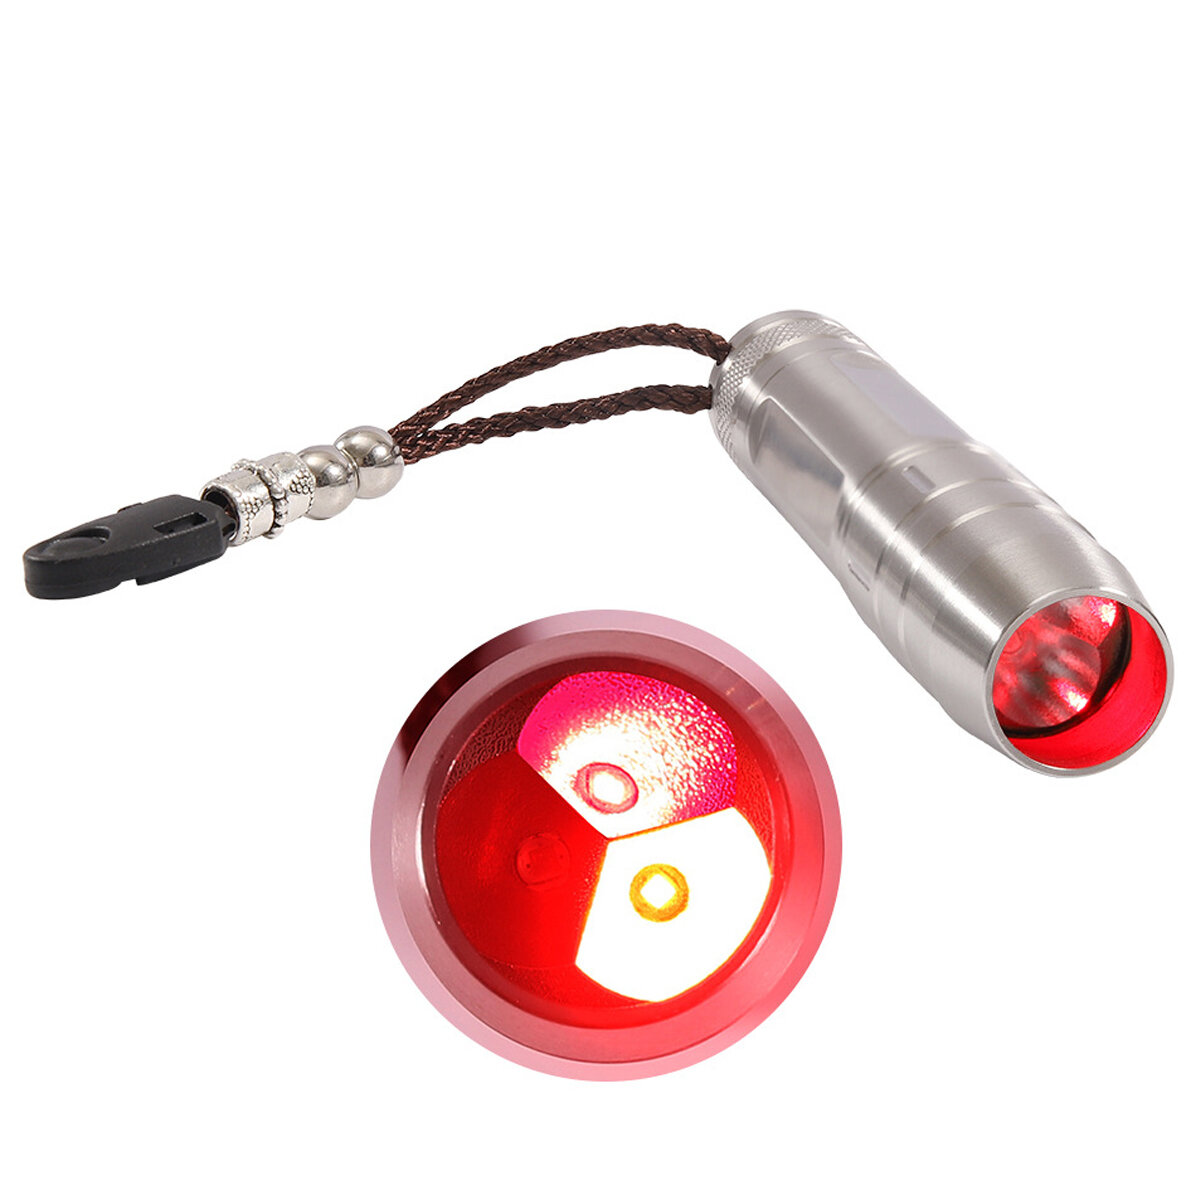 Portable Home Use LED Face Light Therapy 630nm 660nm Red Light Combined With 850nm Infrared Light to